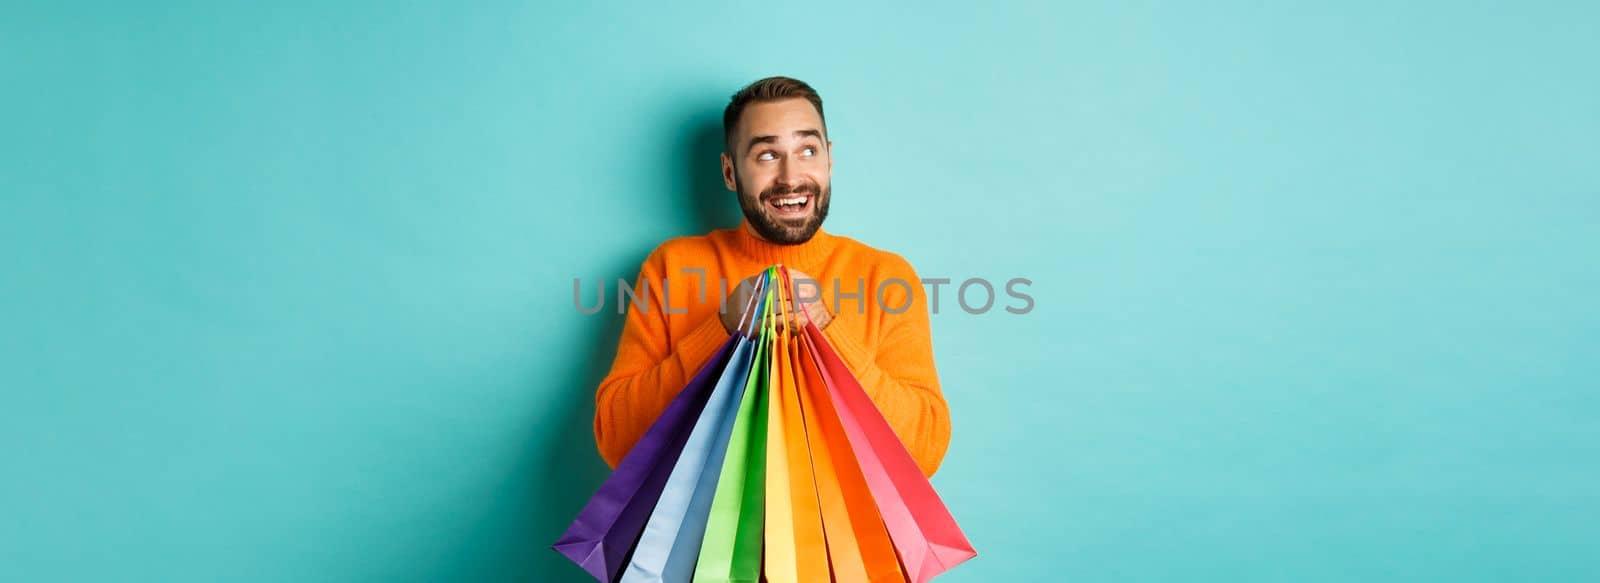 Happy caucasian man in orange sweater, looking left and imaging, holding shopping bags and smiling, standing over turquoise background.